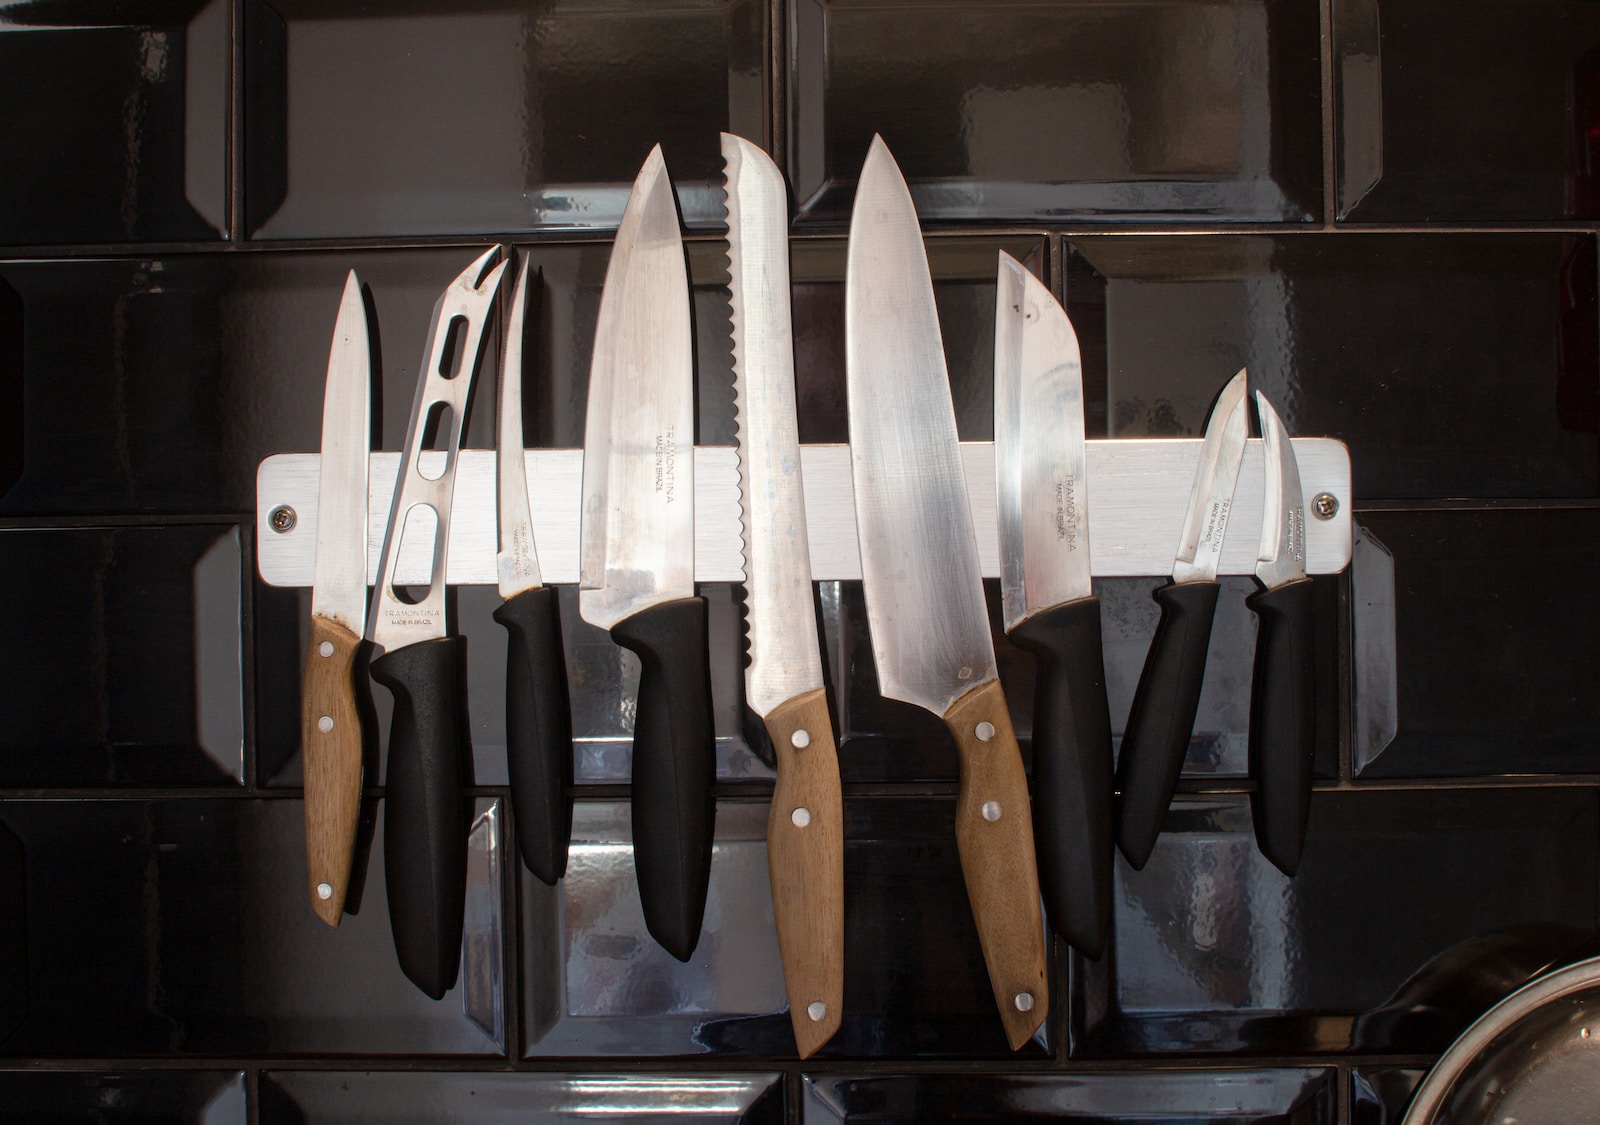 The Best Knives and Shears for Butchering Chickens – Our Top Recommendations